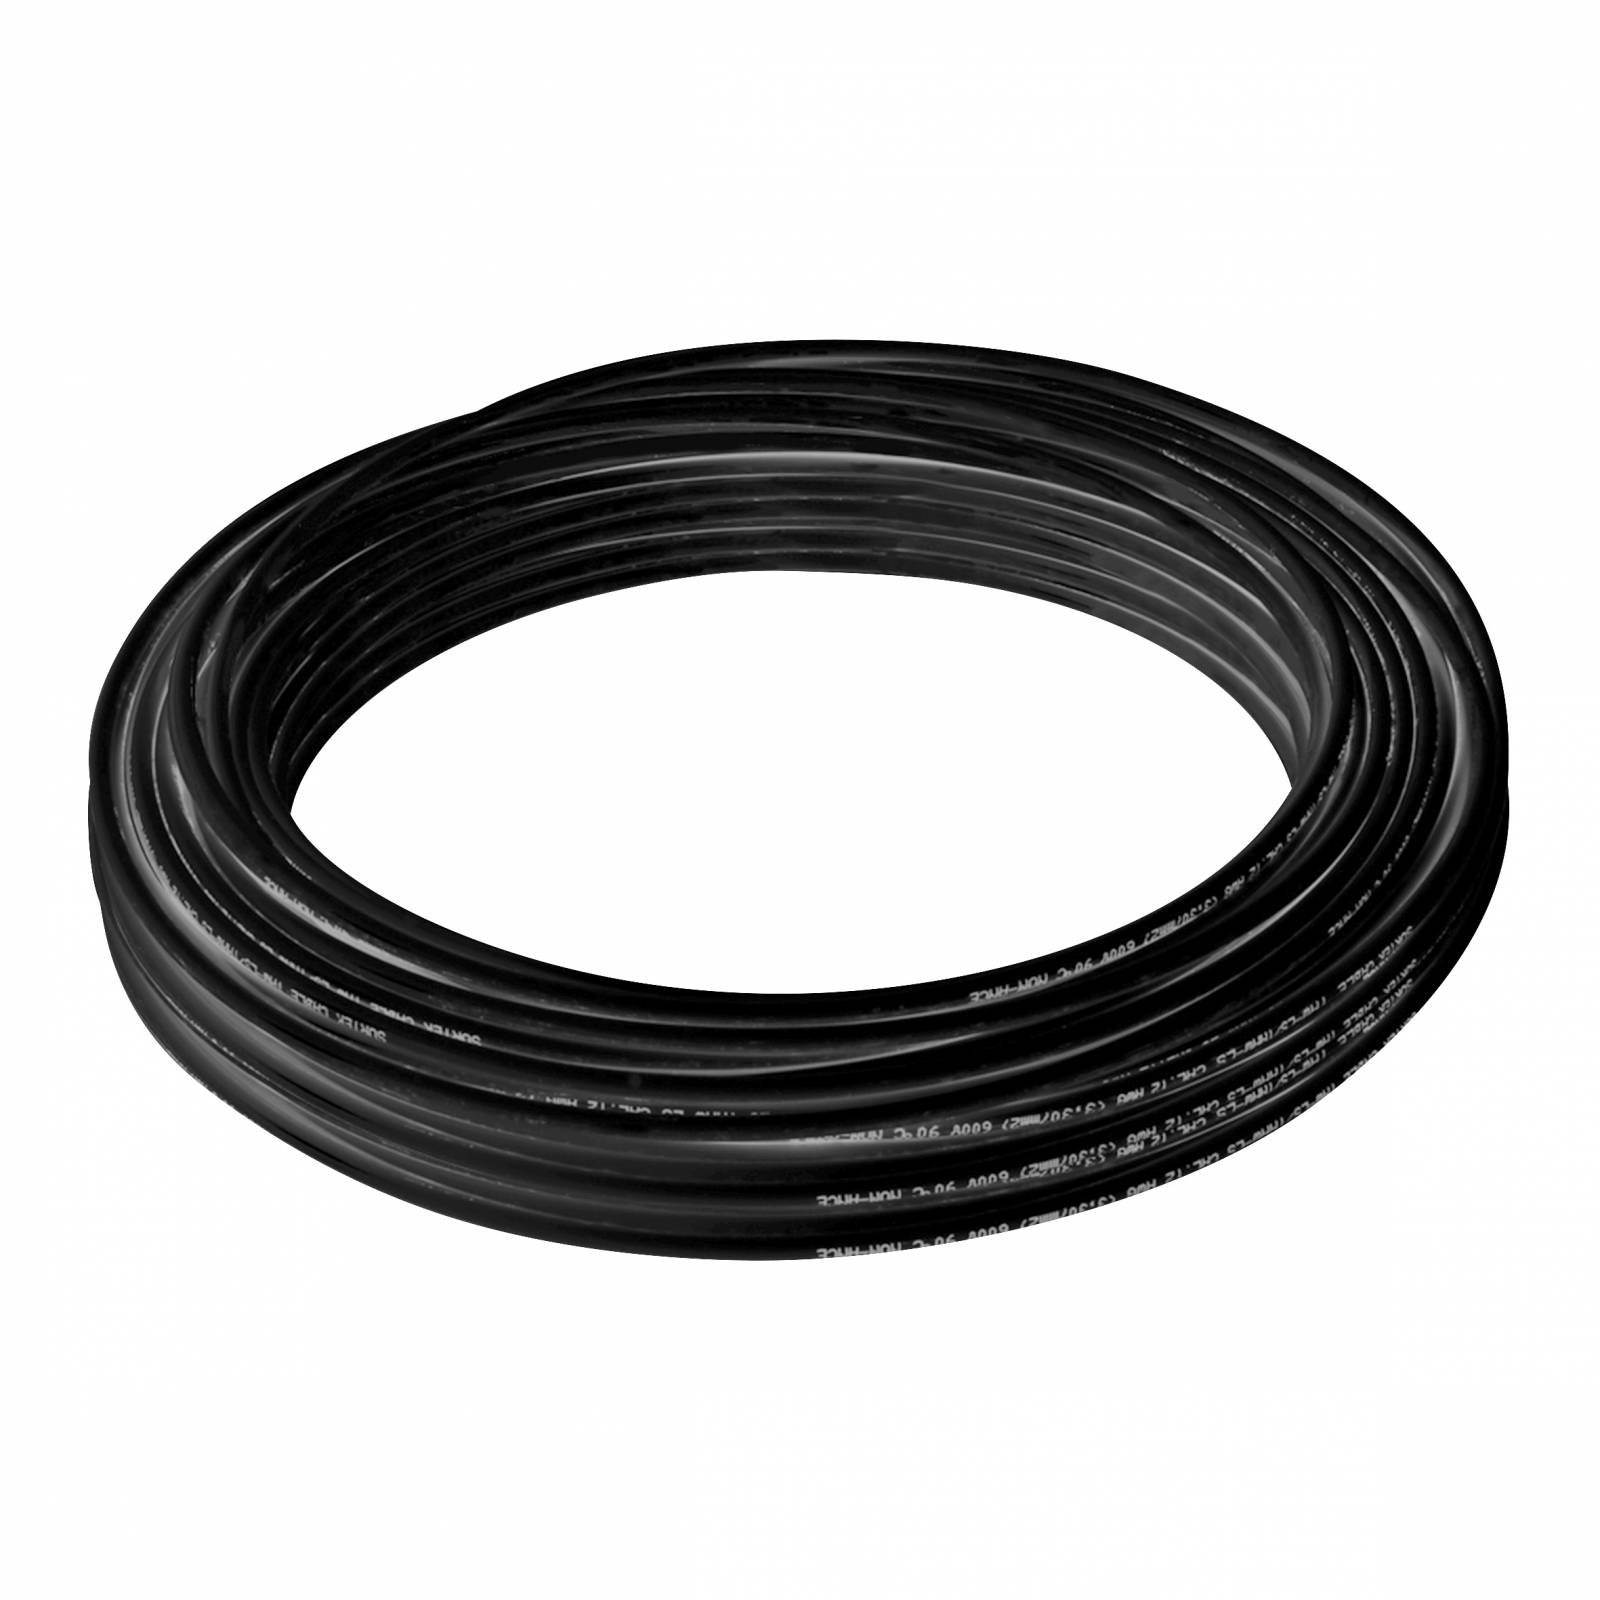 Cable Eléctrico Tipo Thw-ls/thhw-ls Cal.10 100m Negro 136914 